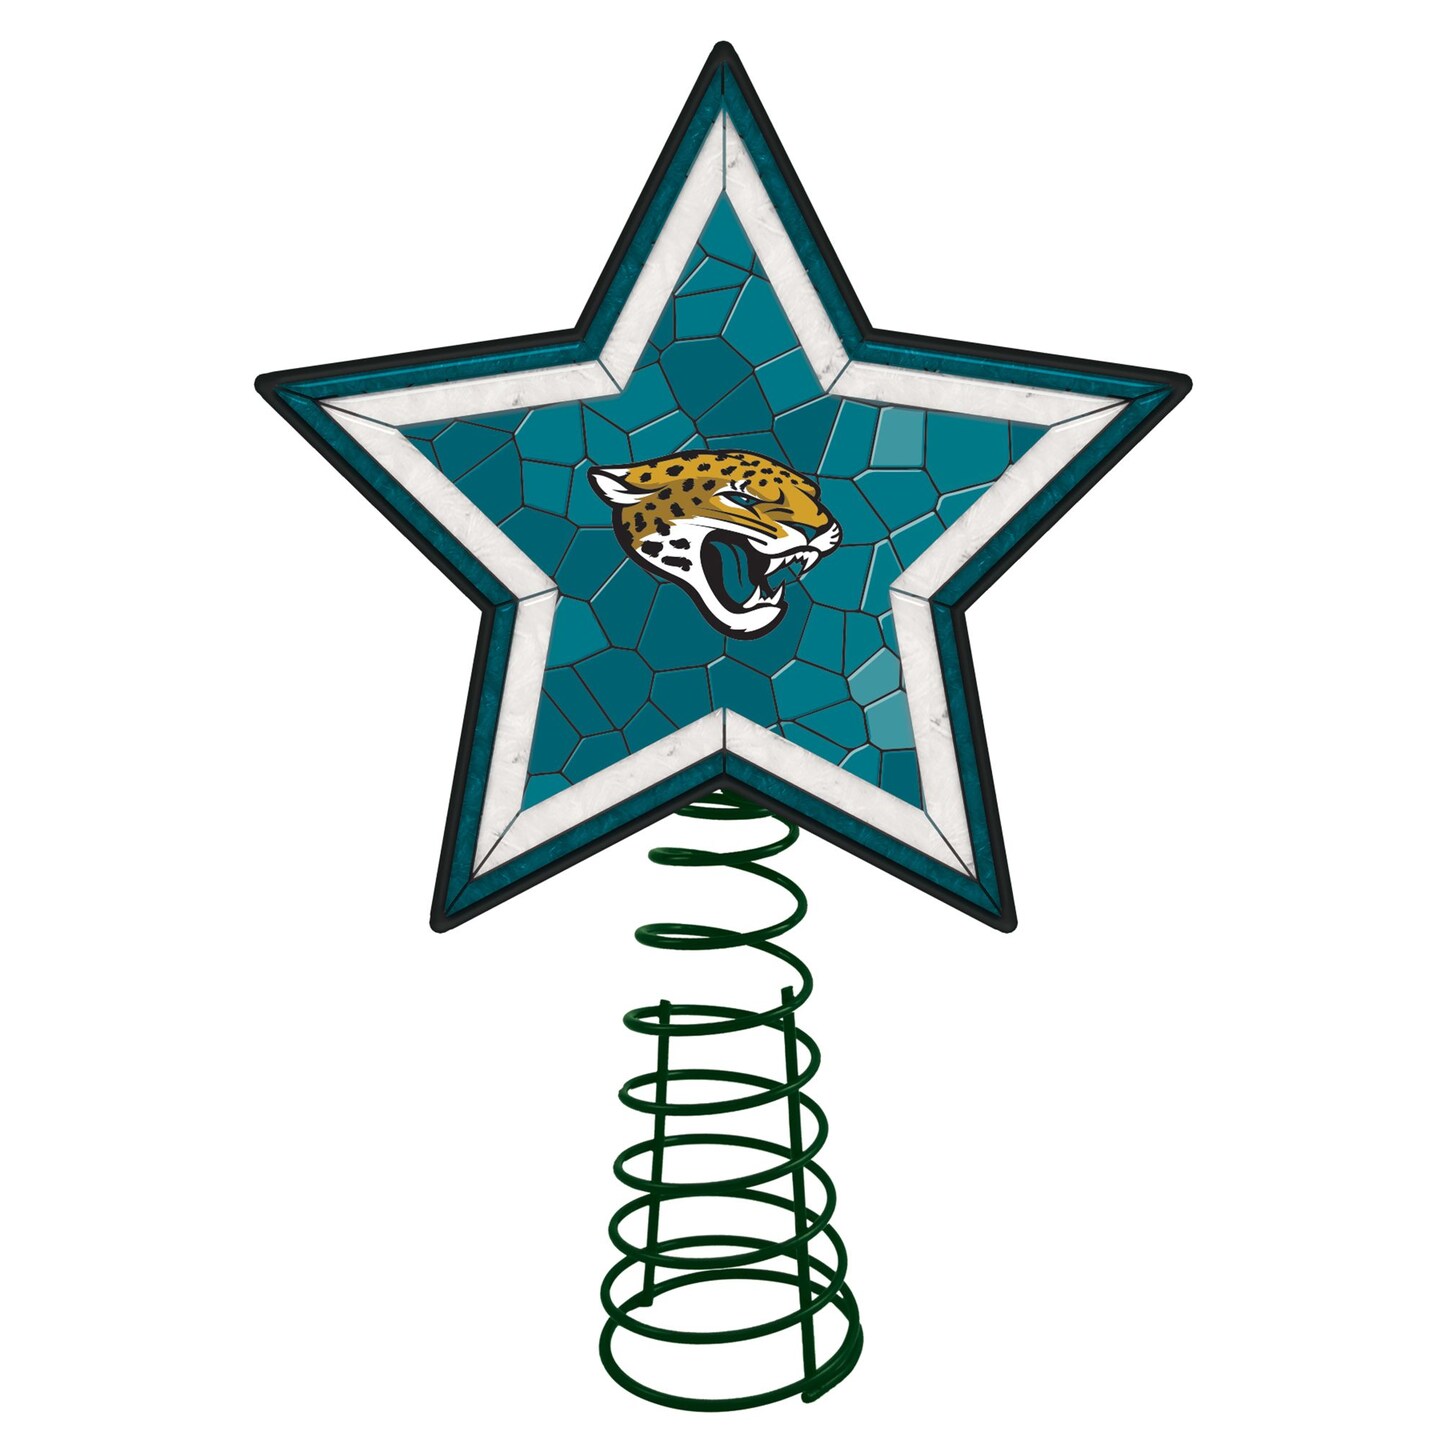 The Memory Company 10' Lighted Teal Green and White Star NFL Jacksonville  Jaguars Christmas Tree Topper